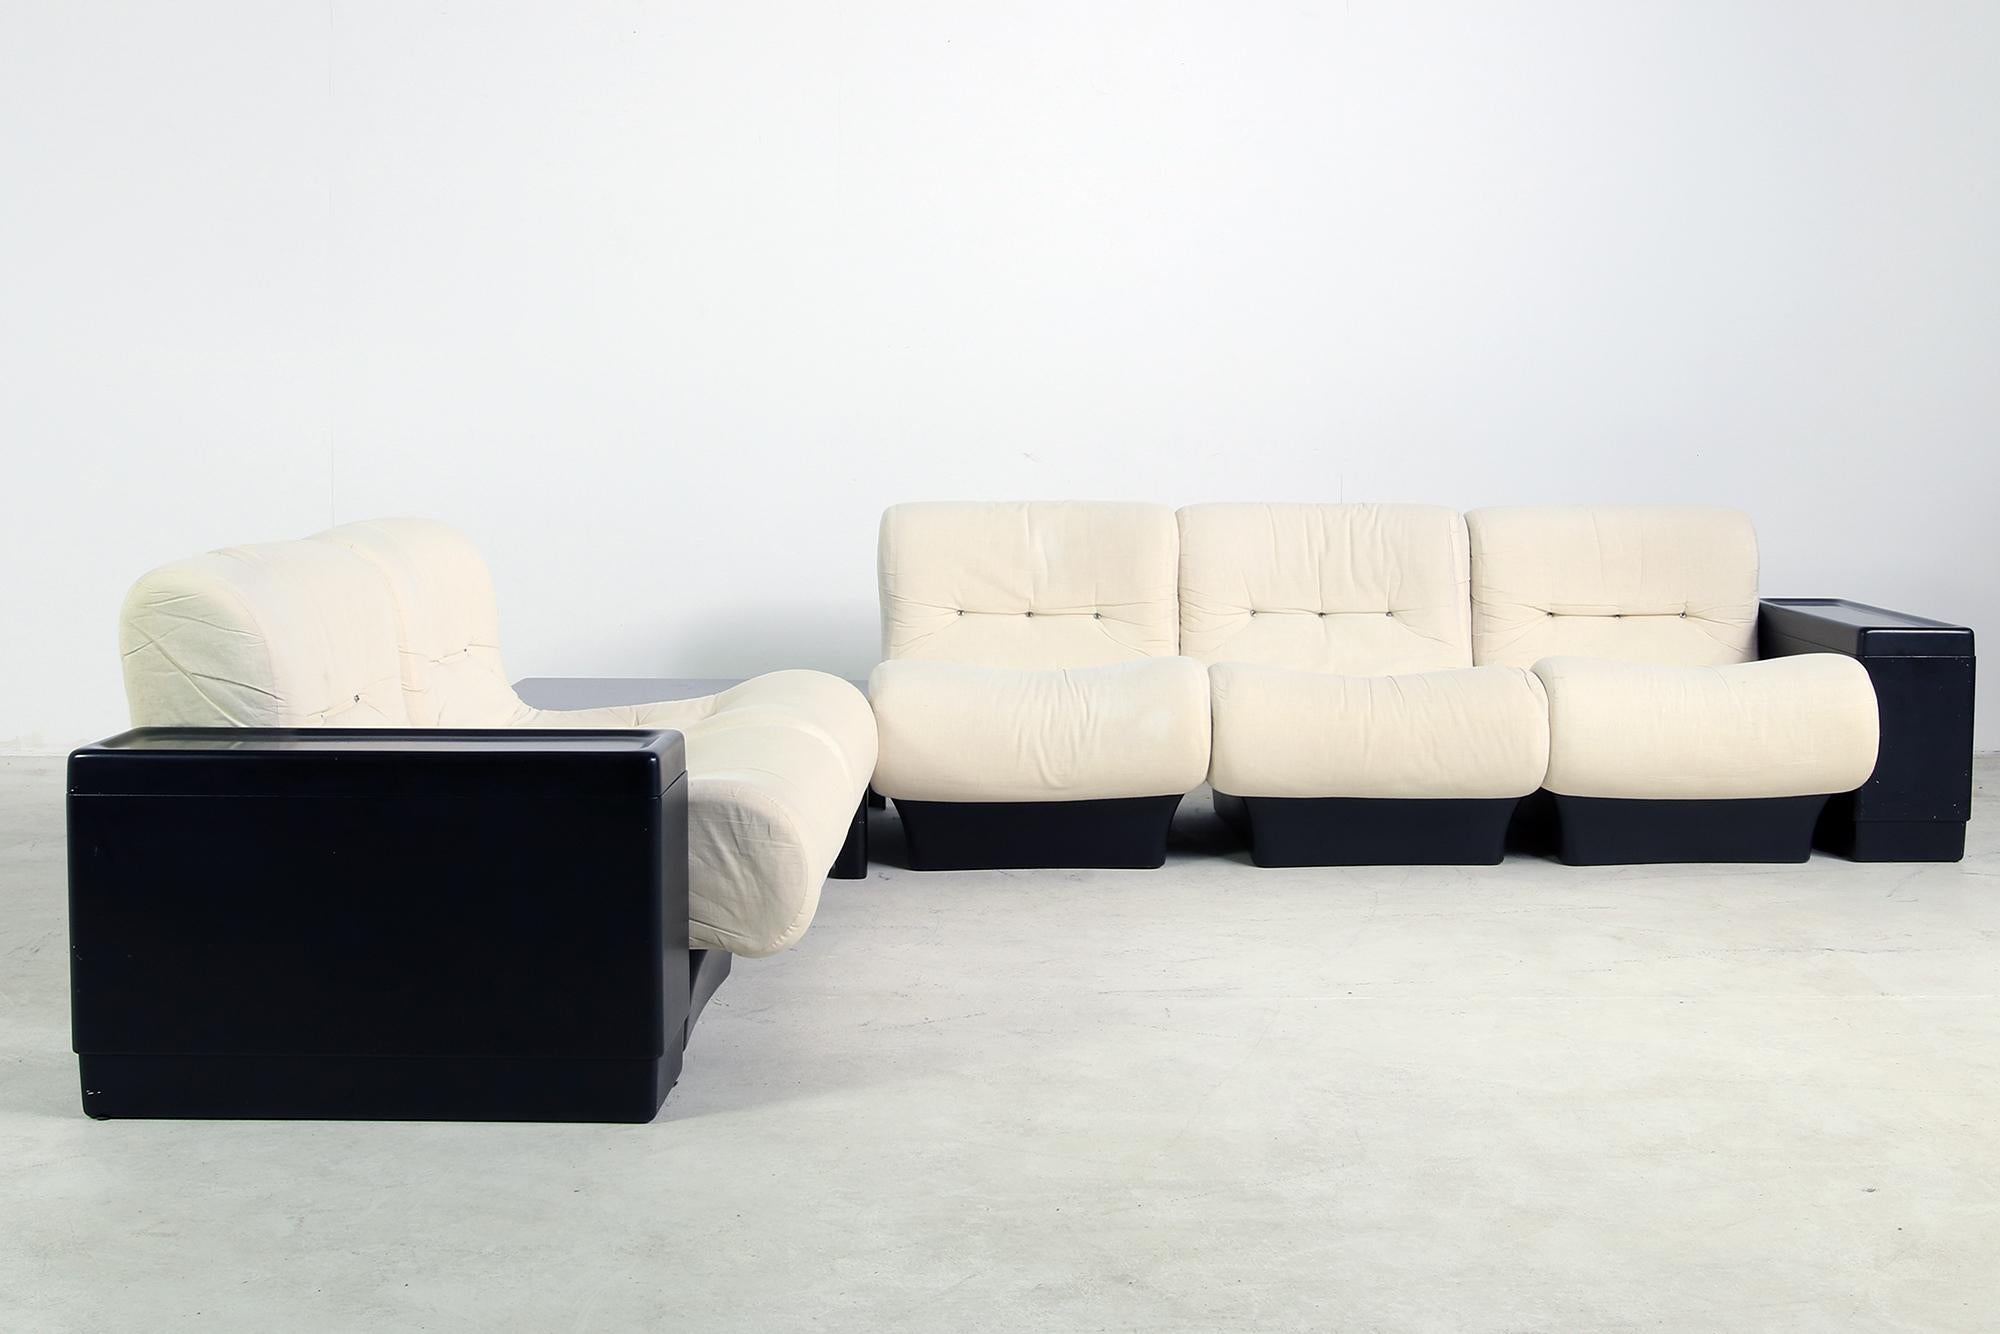 Beautiful vintage modular set, landscape seating, sofa and/or lounge chairs, designed by Otto Zapf for Vitsoe, rare fiberglass base, solid made seats, with additional white covers (should be cleaned, have zippers and are removable) tufted seats